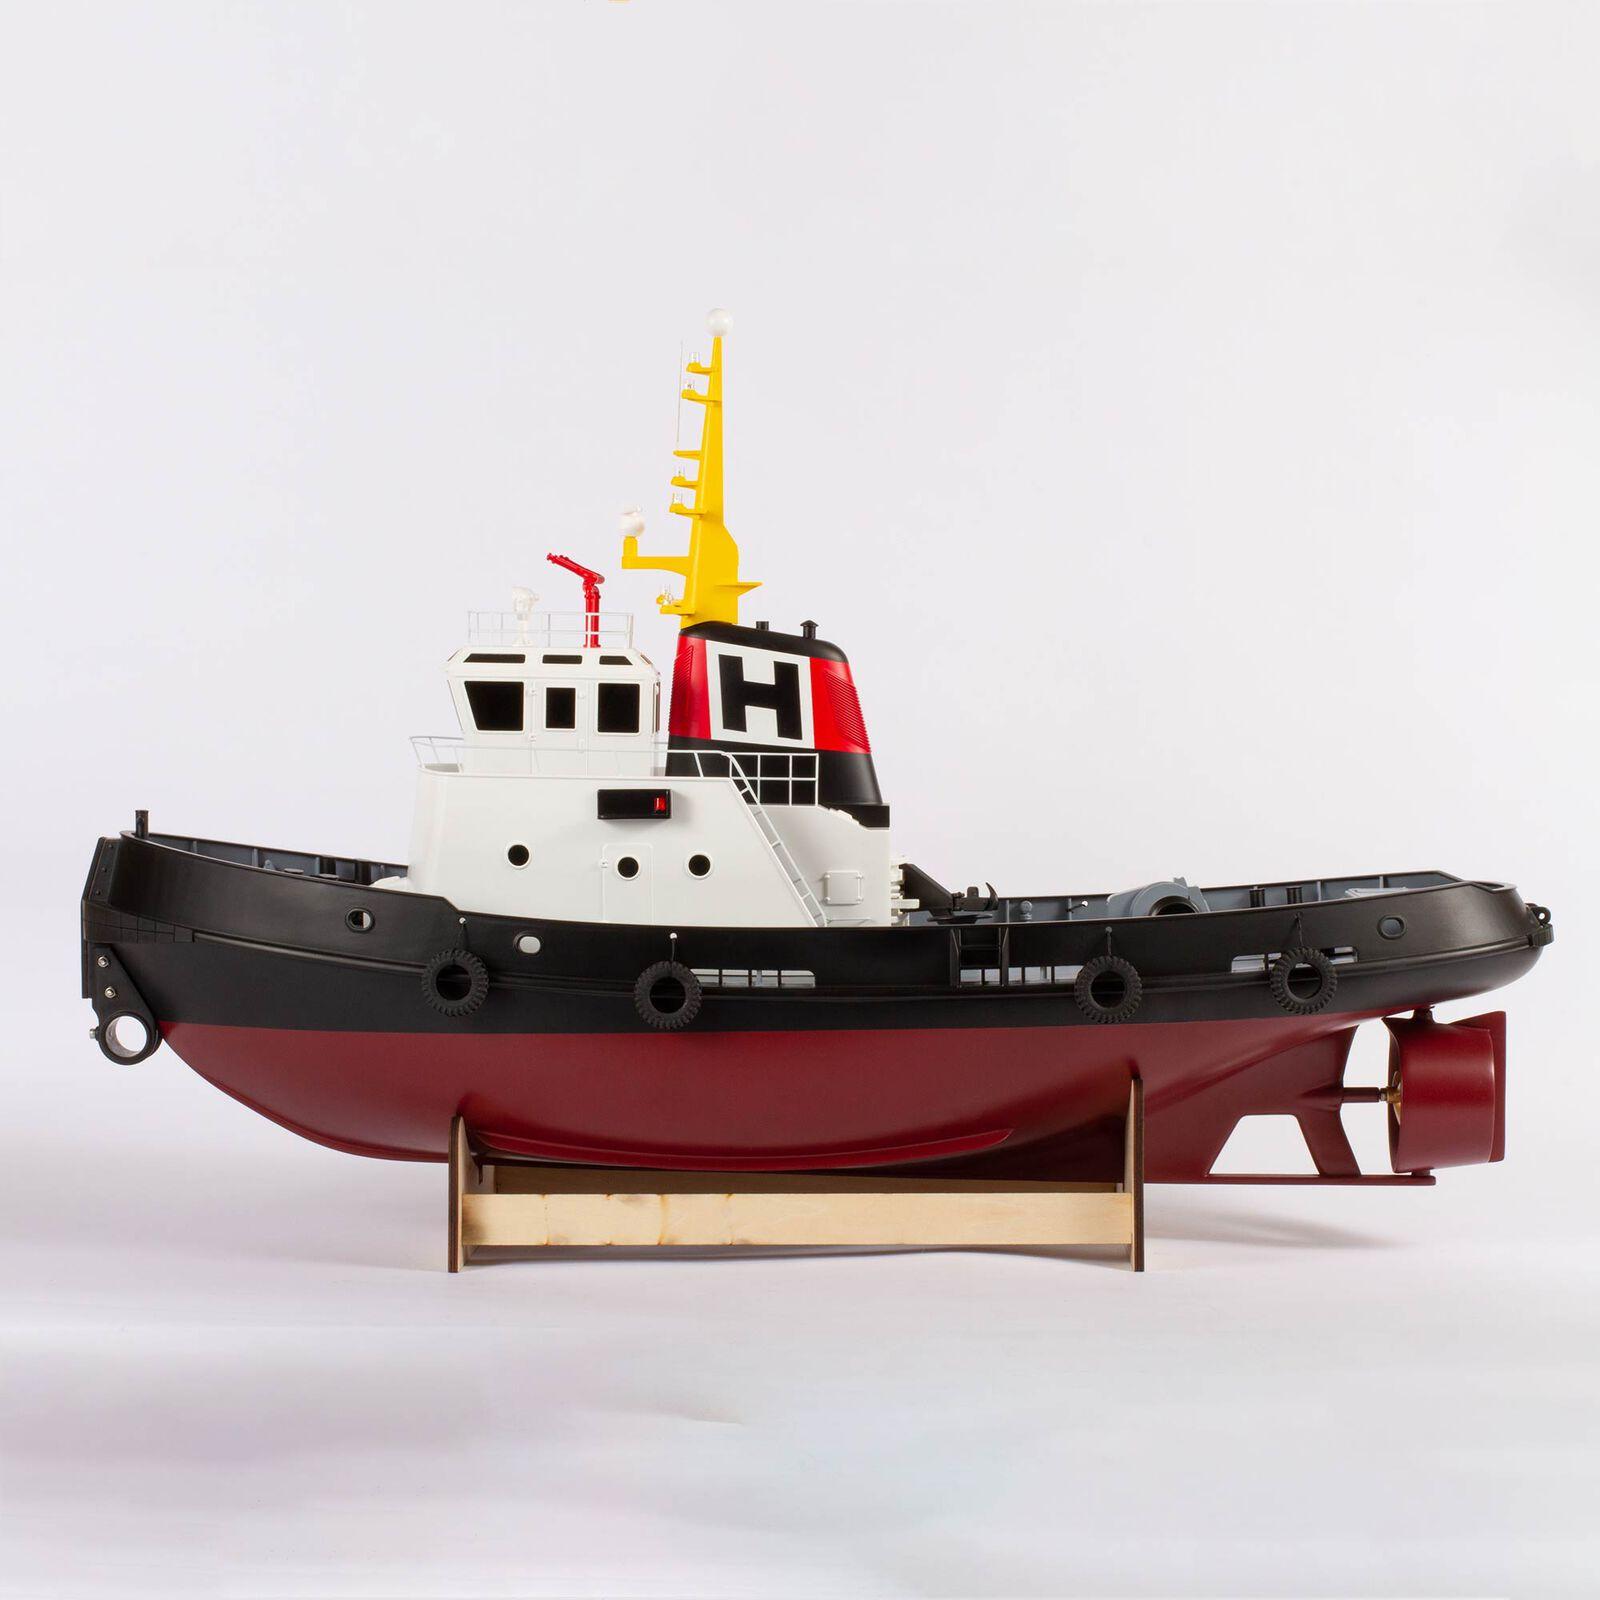 Rc Tugboats: Building an RC Tugboat: Fun, Challenging, and Rewarding!